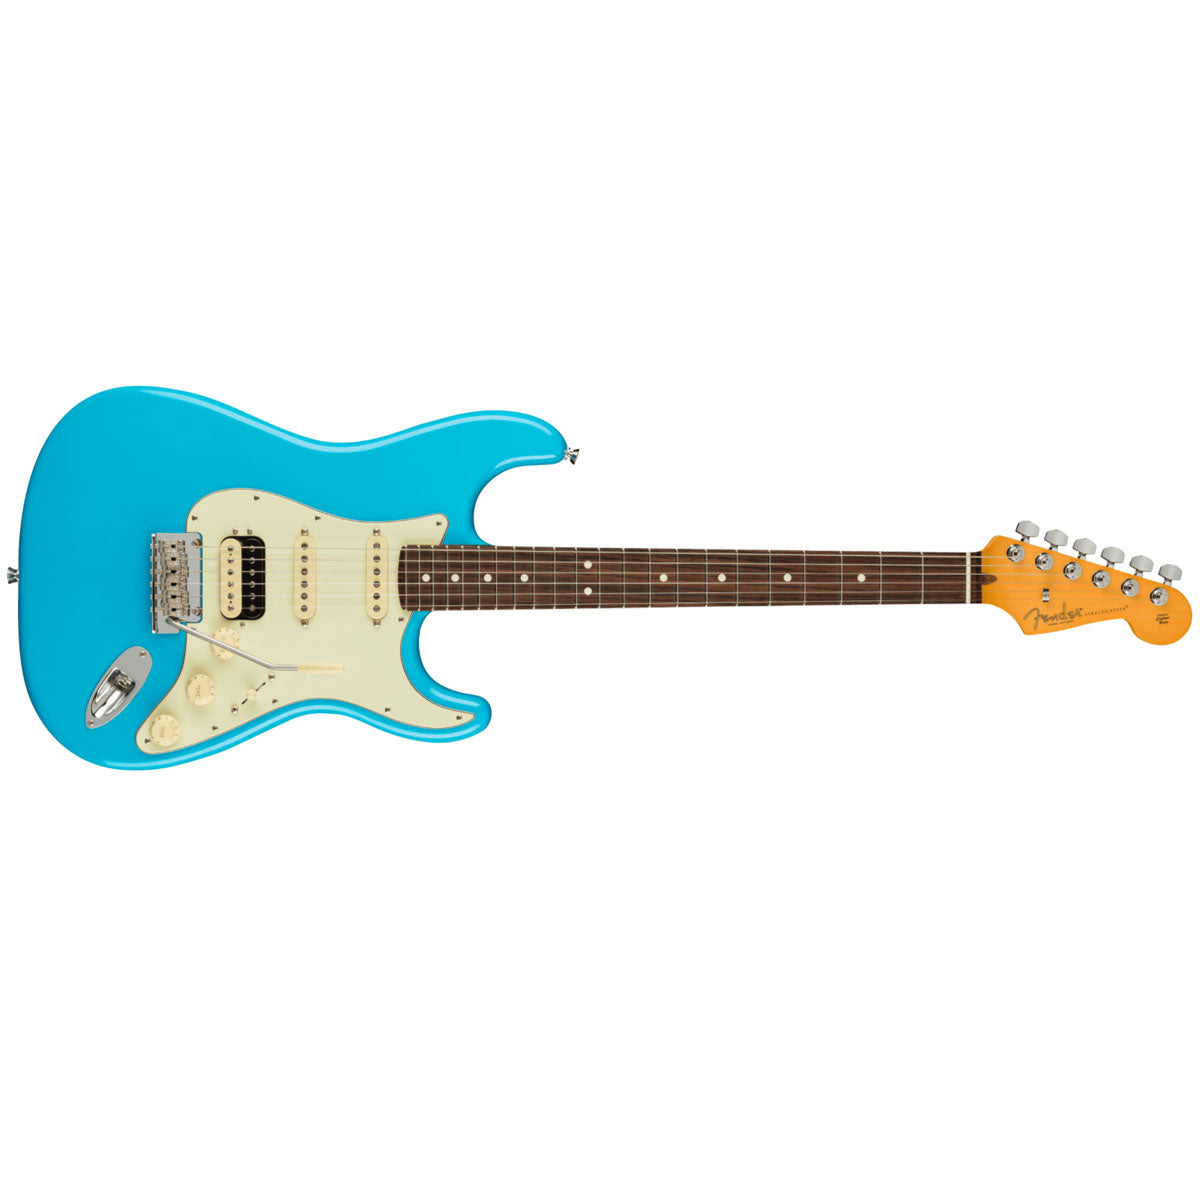 Fender American Professional II Stratocaster Electric Guitar HSS Rosewood Fingerboard Miami Blue - 0113910719